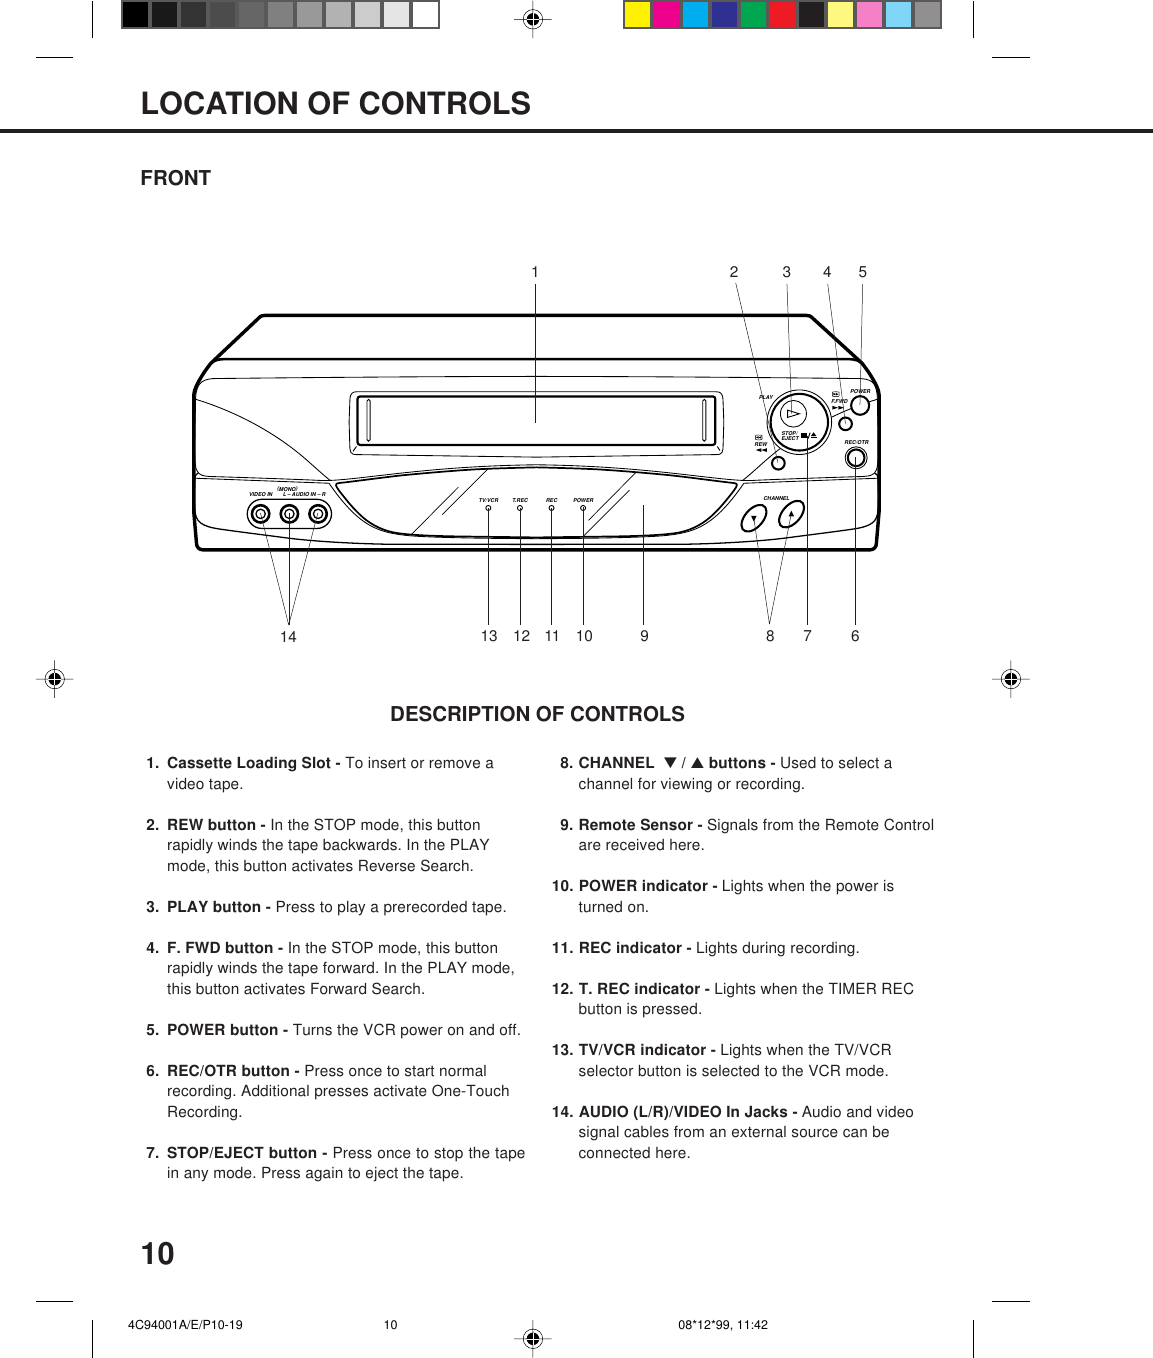 10PLAYREWPOWERREC/OTRF.FWDSTOP/EJECTCHANNELTV/VCR T.REC REC POWERVIDEO IN (MONO)L – AUDIO IN – RFRONTLOCATION OF CONTROLS14532DESCRIPTION OF CONTROLS1. Cassette Loading Slot - To insert or remove avideo tape.2. REW button - In the STOP mode, this buttonrapidly winds the tape backwards. In the PLAYmode, this button activates Reverse Search.3. PLAY button - Press to play a prerecorded tape.4. F. FWD button - In the STOP mode, this buttonrapidly winds the tape forward. In the PLAY mode,this button activates Forward Search.5. POWER button - Turns the VCR power on and off.6. REC/OTR button - Press once to start normalrecording. Additional presses activate One-TouchRecording.7. STOP/EJECT button - Press once to stop the tapein any mode. Press again to eject the tape.68913 1114 12 10 78. CHANNEL  ▼ / ▲ buttons - Used to select achannel for viewing or recording.9. Remote Sensor - Signals from the Remote Controlare received here.10. POWER indicator - Lights when the power isturned on.11. REC indicator - Lights during recording.12. T. REC indicator - Lights when the TIMER RECbutton is pressed.13. TV/VCR indicator - Lights when the TV/VCRselector button is selected to the VCR mode.14. AUDIO (L/R)/VIDEO In Jacks - Audio and videosignal cables from an external source can beconnected here.  4C94001A/E/P10-19 08*12*99, 11:4210